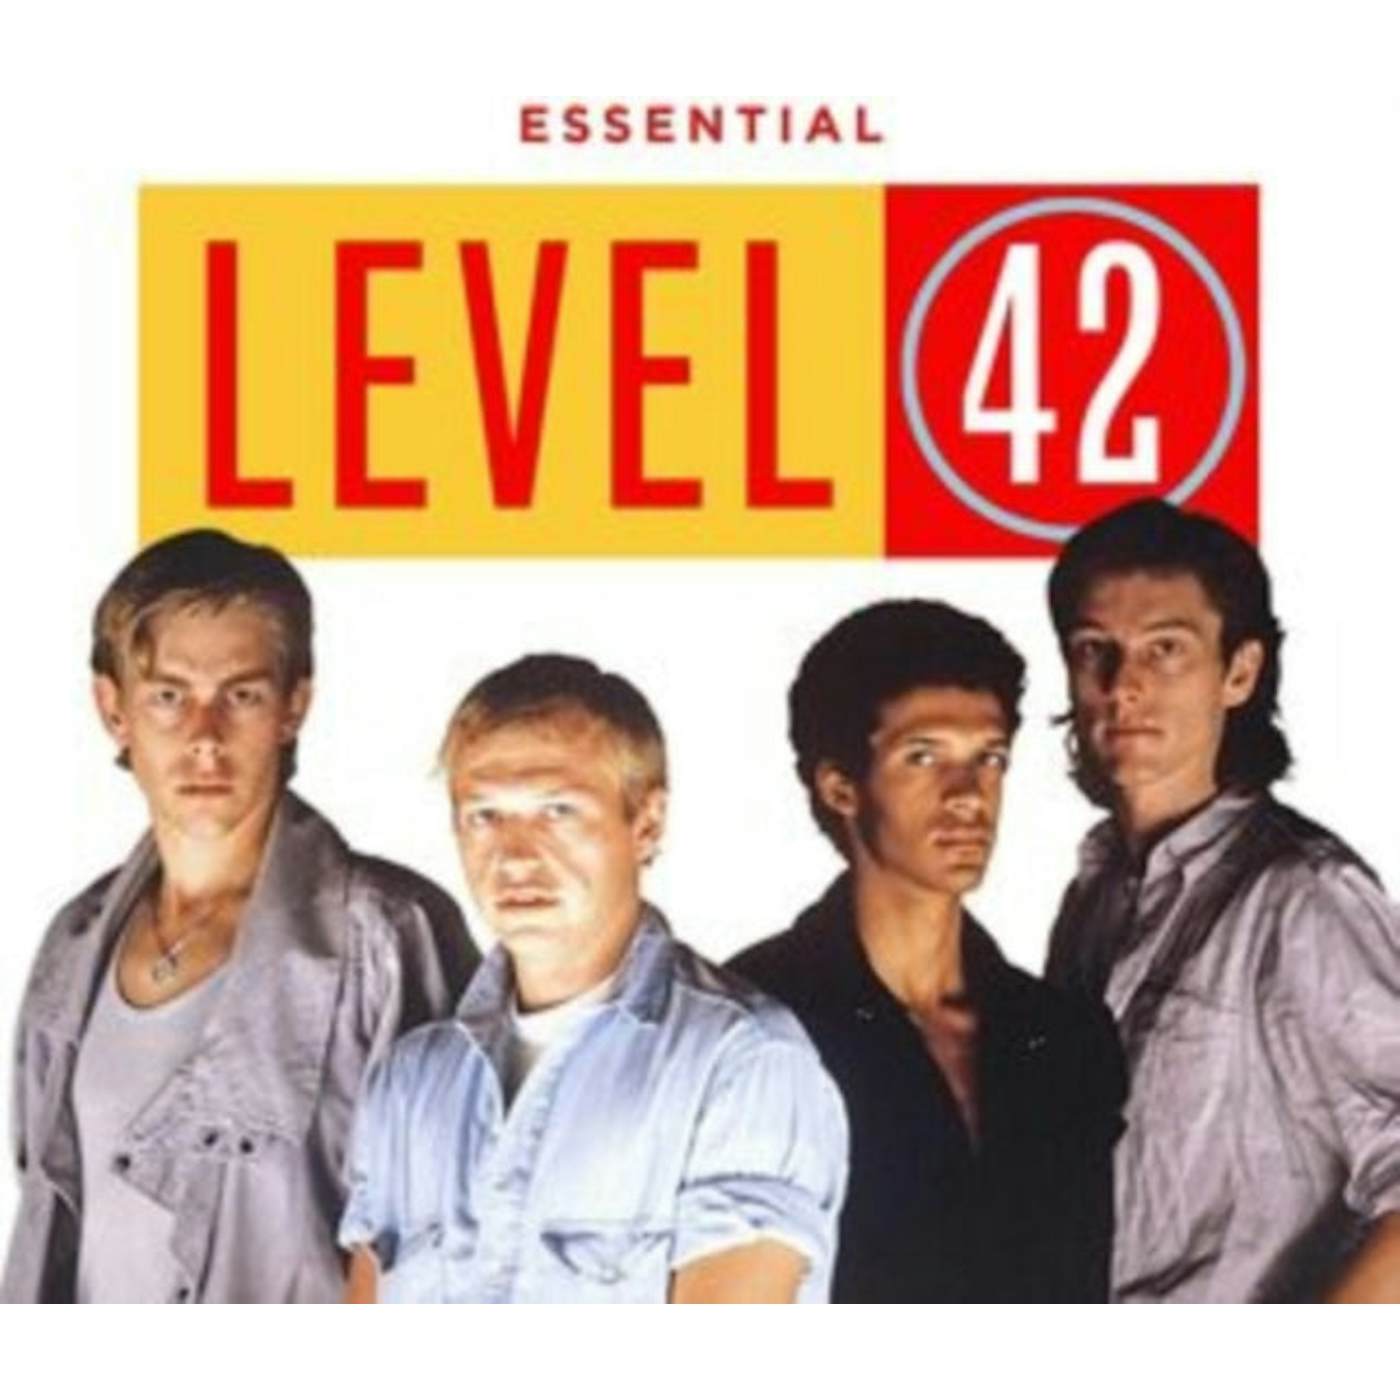 Level 42 CD - The Essential Level 42